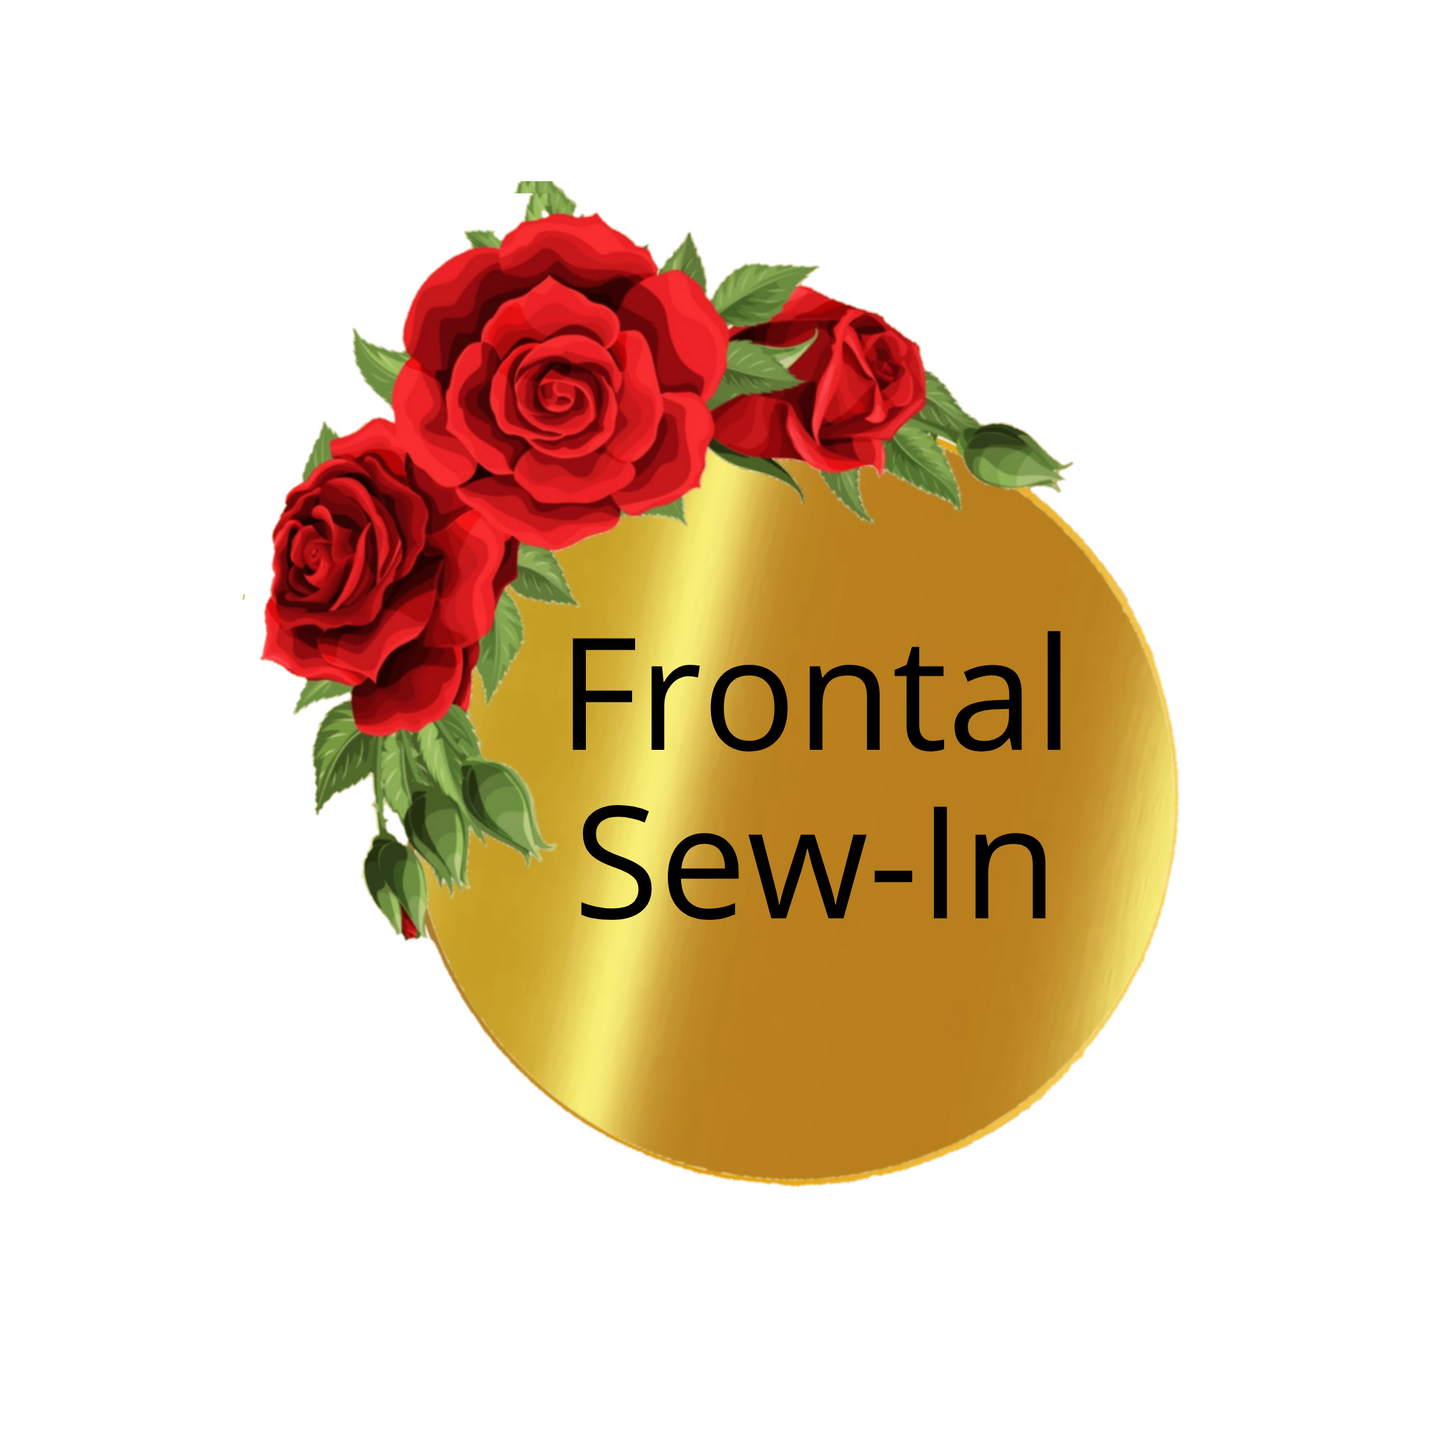 Frontal Sew-In